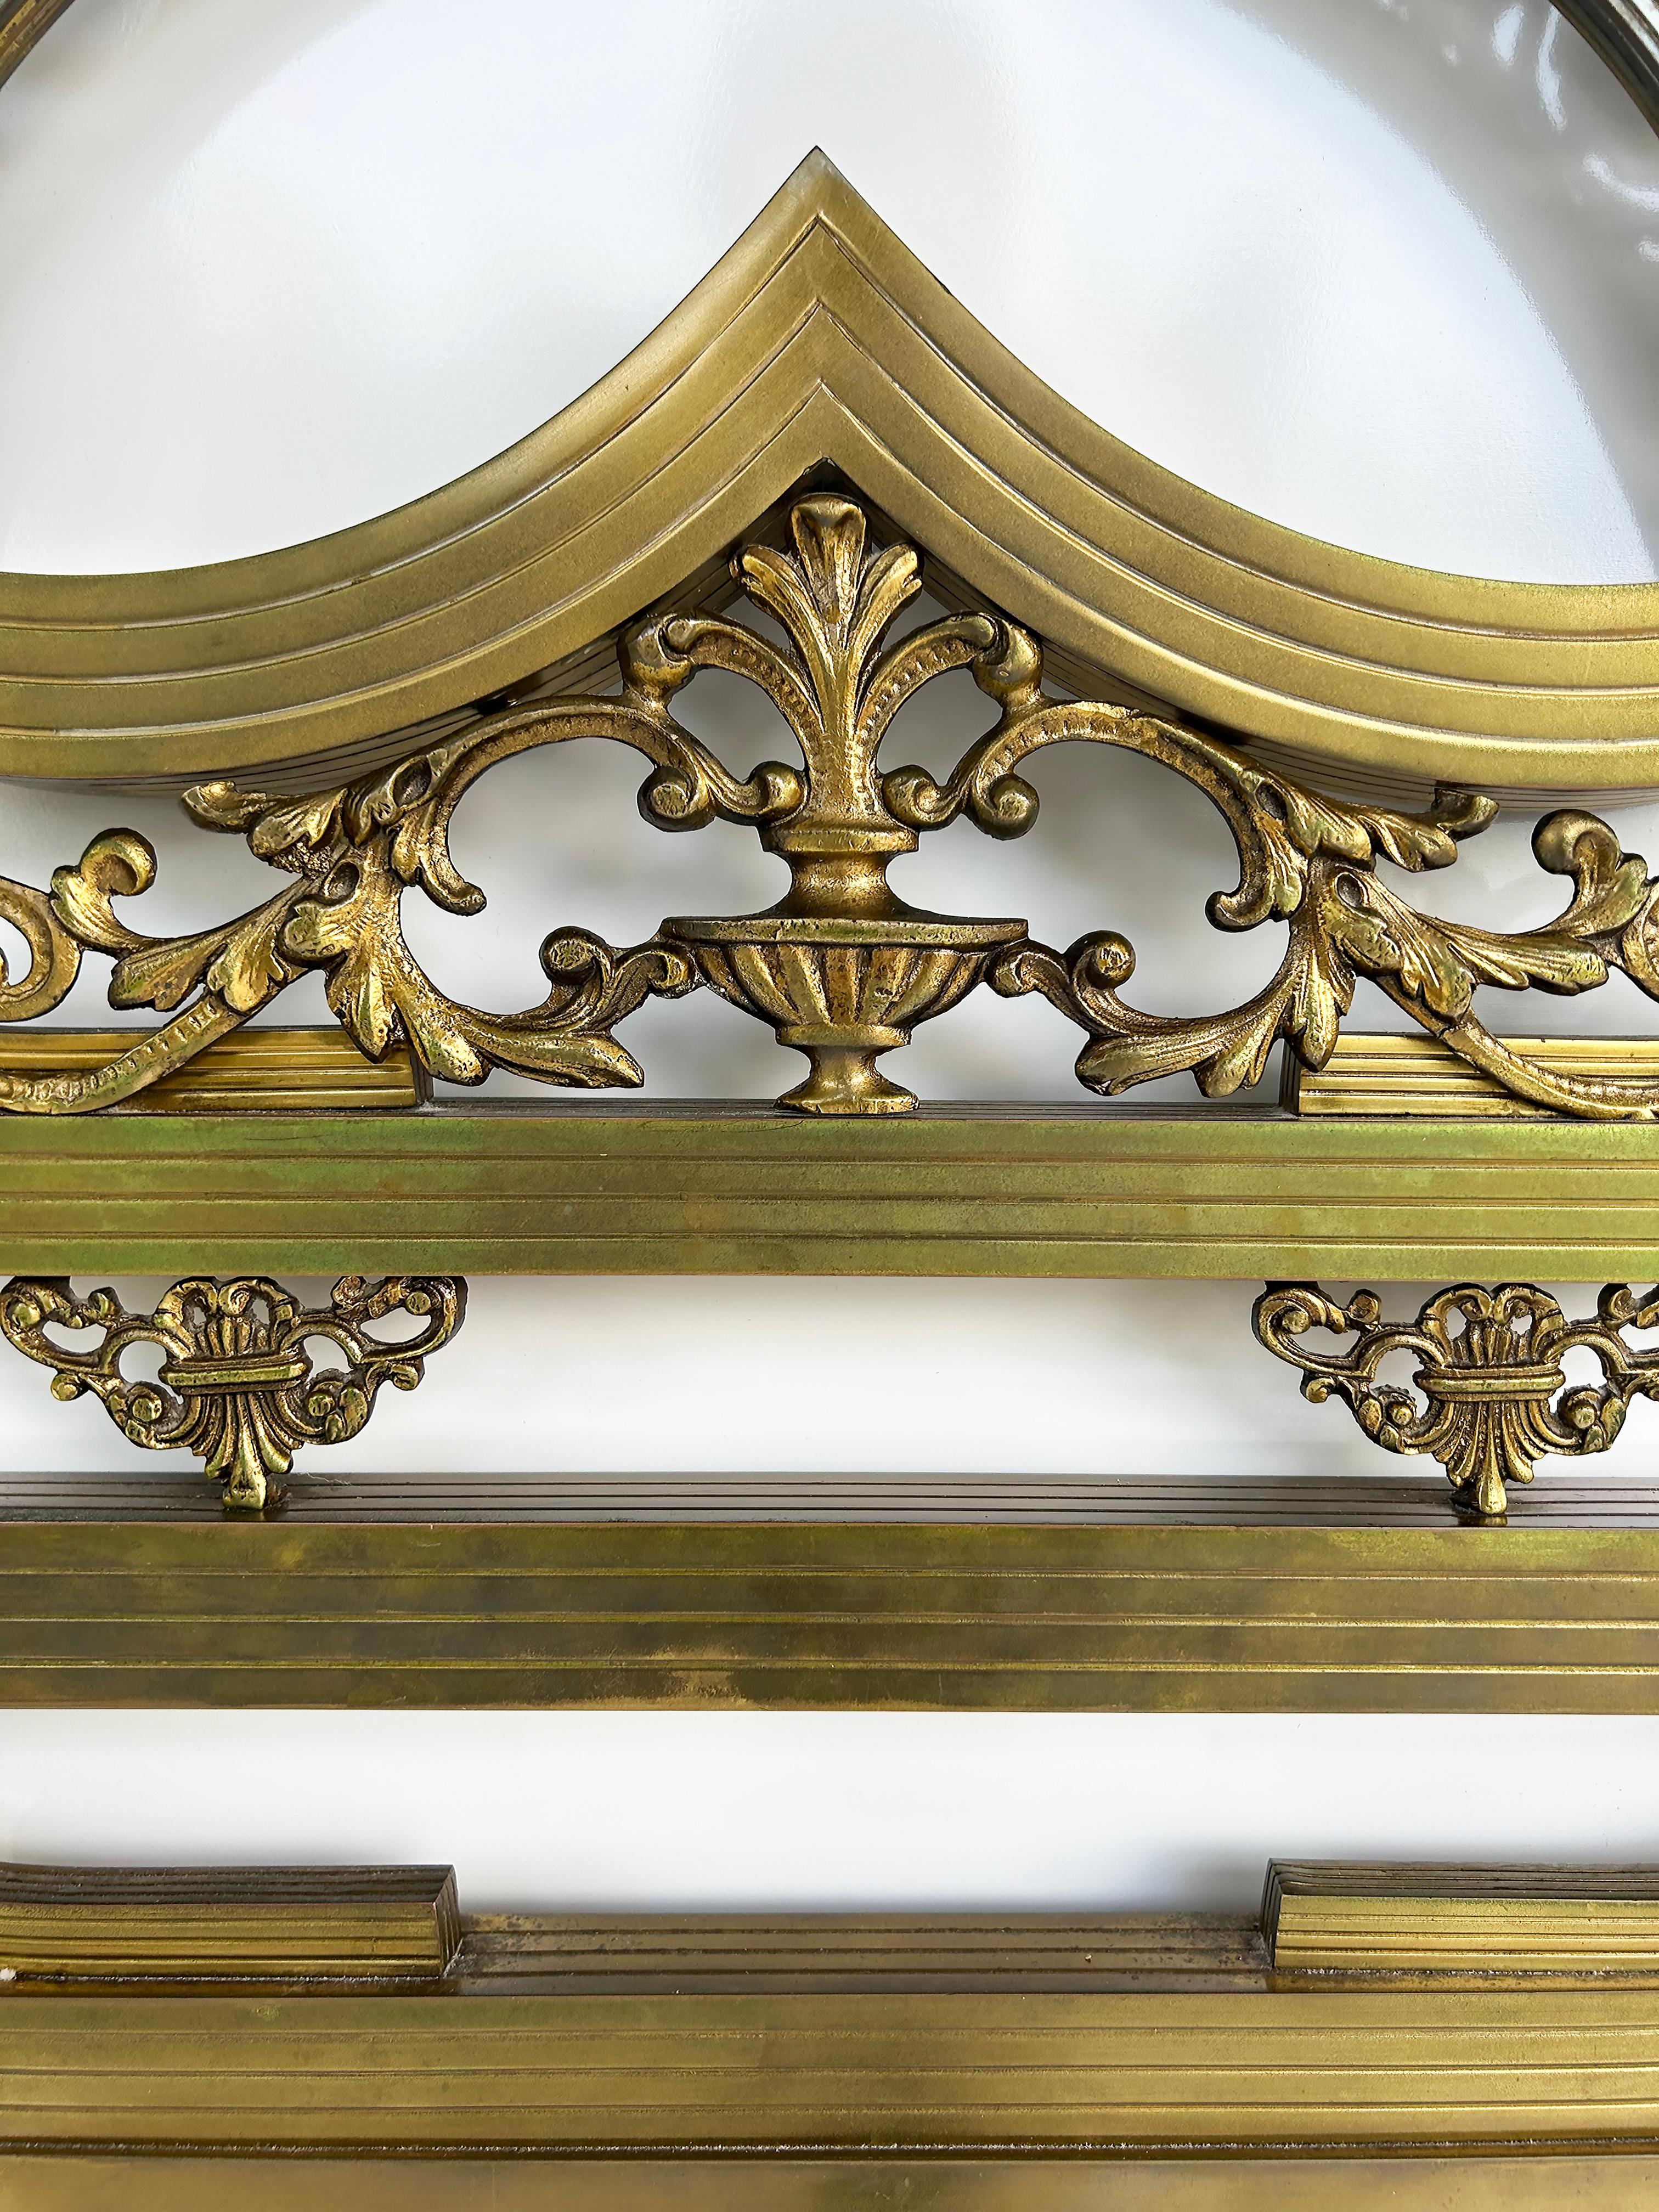 Art Deco Style Brass King Size Headboard with Stylized Urn and Acanthus Design

Offered for sale is an Art Deco-style brass headboard with elegantly detailed casting and worked brass motifs. The headboard has decorative cast feet and brackets to